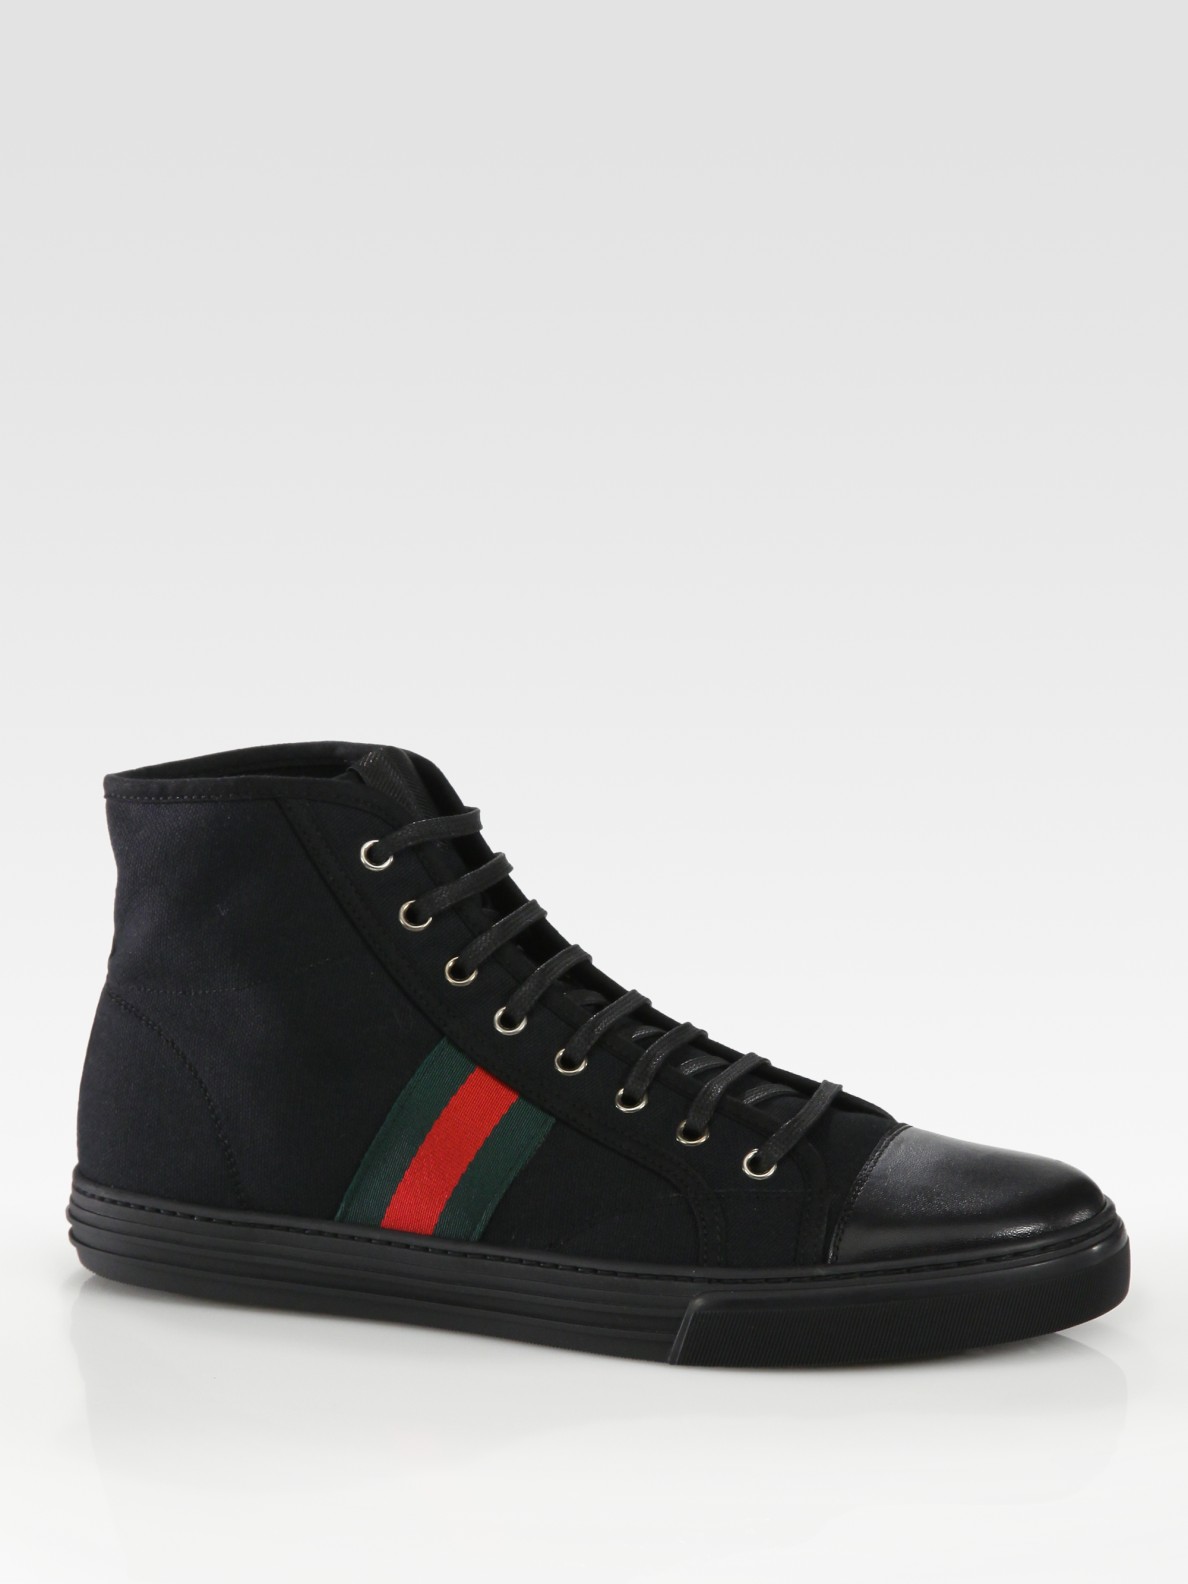 Gucci High-top Sneaker in Black for Men | Lyst